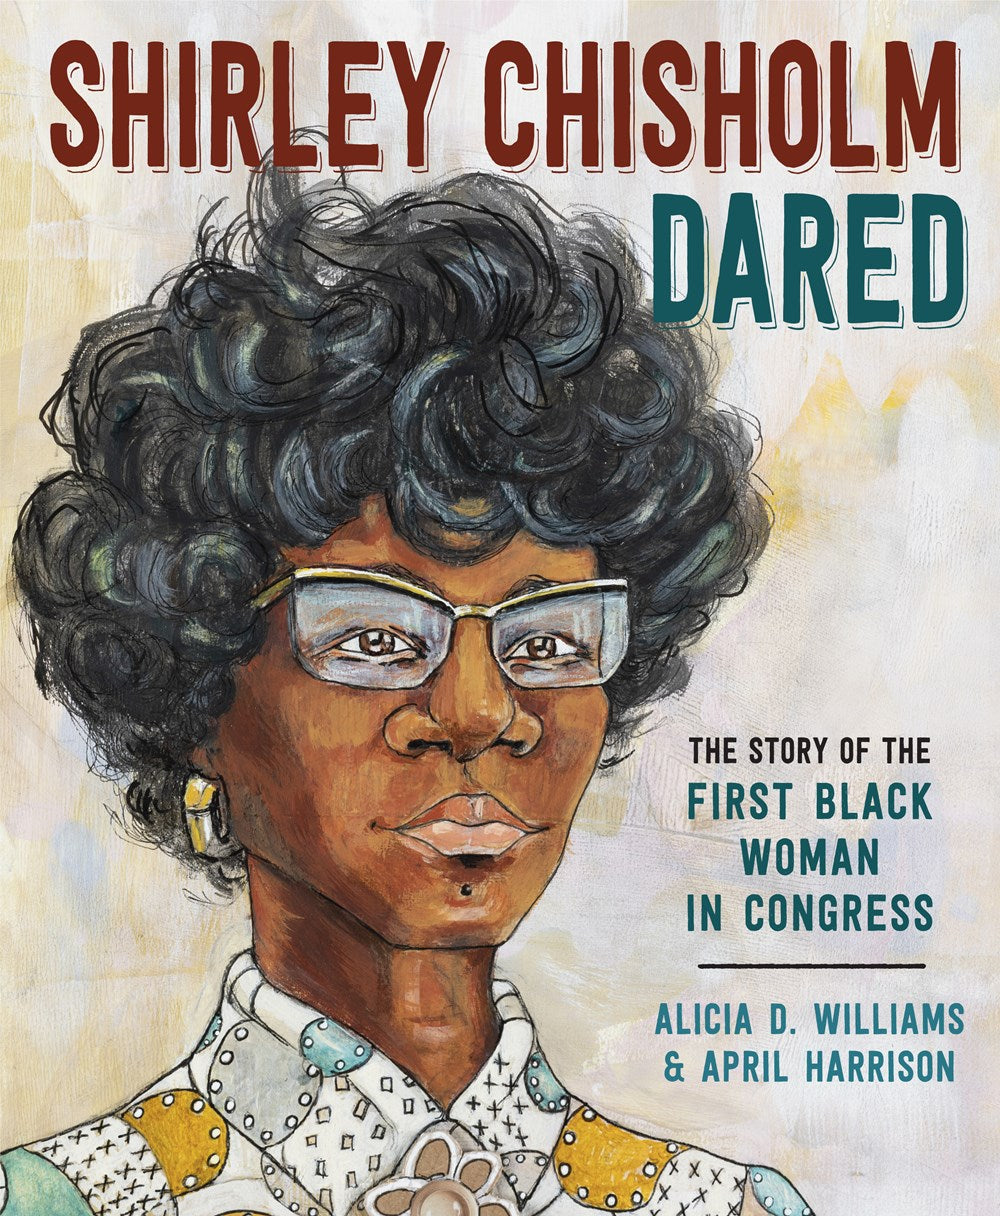 Shirley Chisholm Dared: The Story of the First Black Woman in Congress by Alicia D. Williams